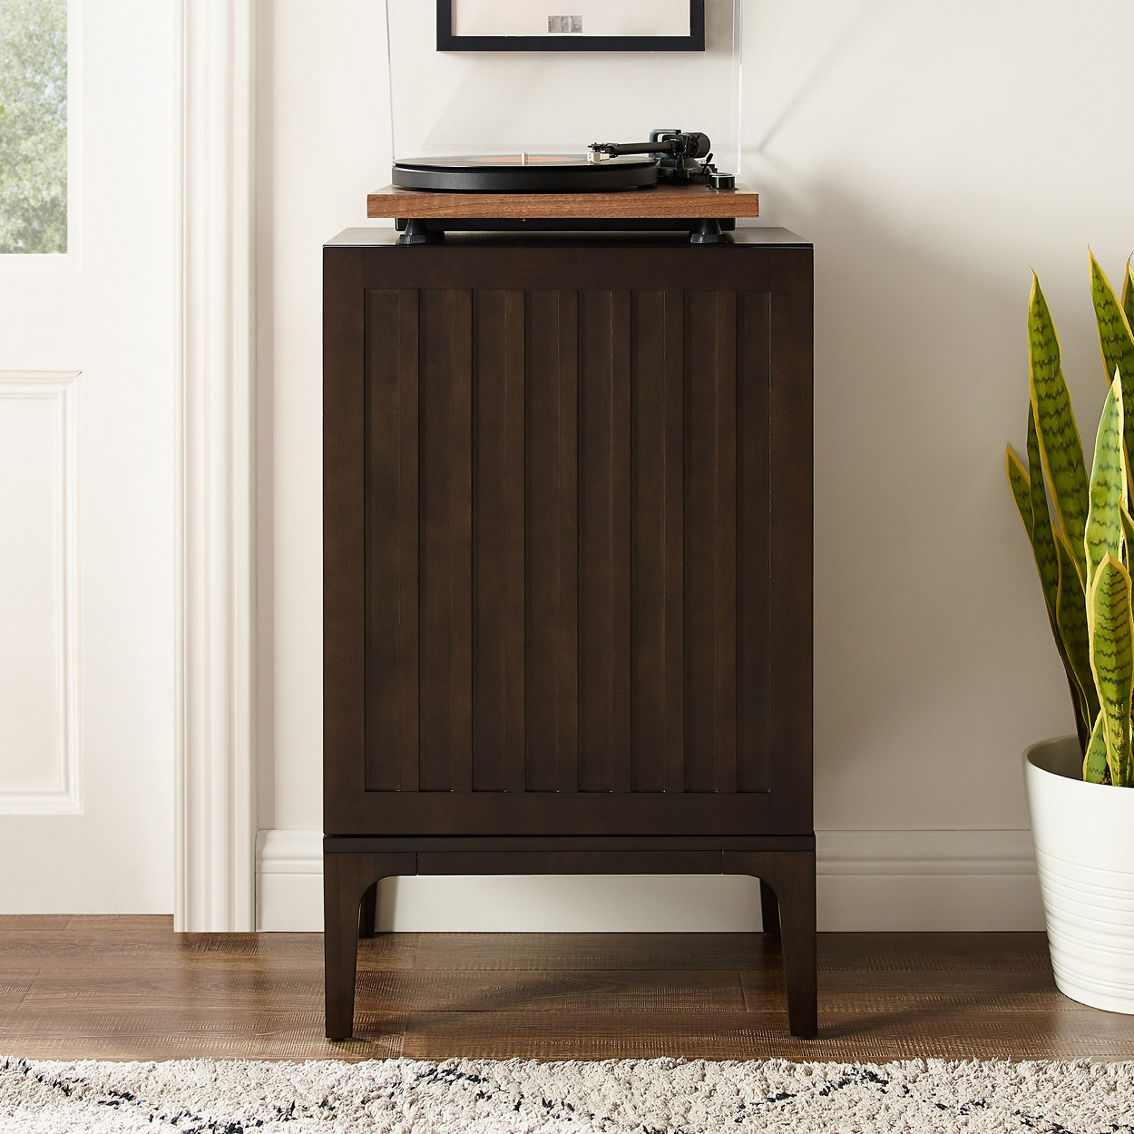 Crosley Furniture Asher Record Storage Stand - Image 7 of 7